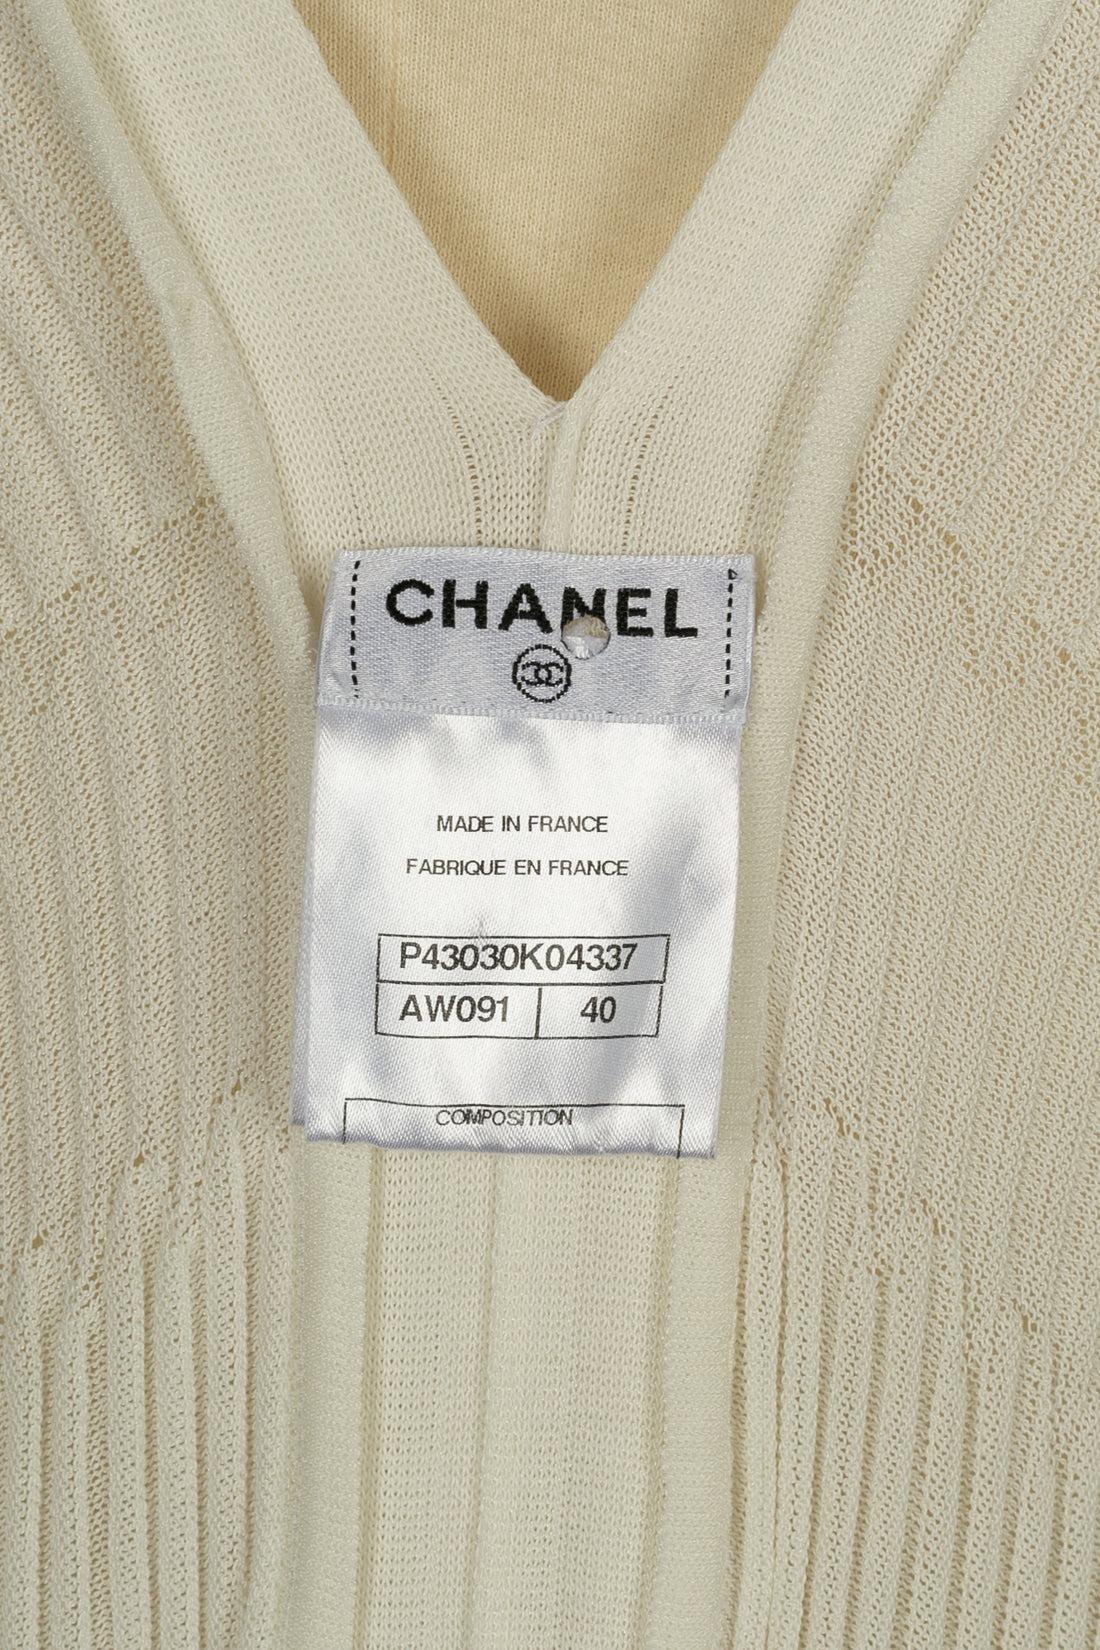 Chanel Dress in White Cotton Blend, Zip in Silver Plated Metal For Sale 3